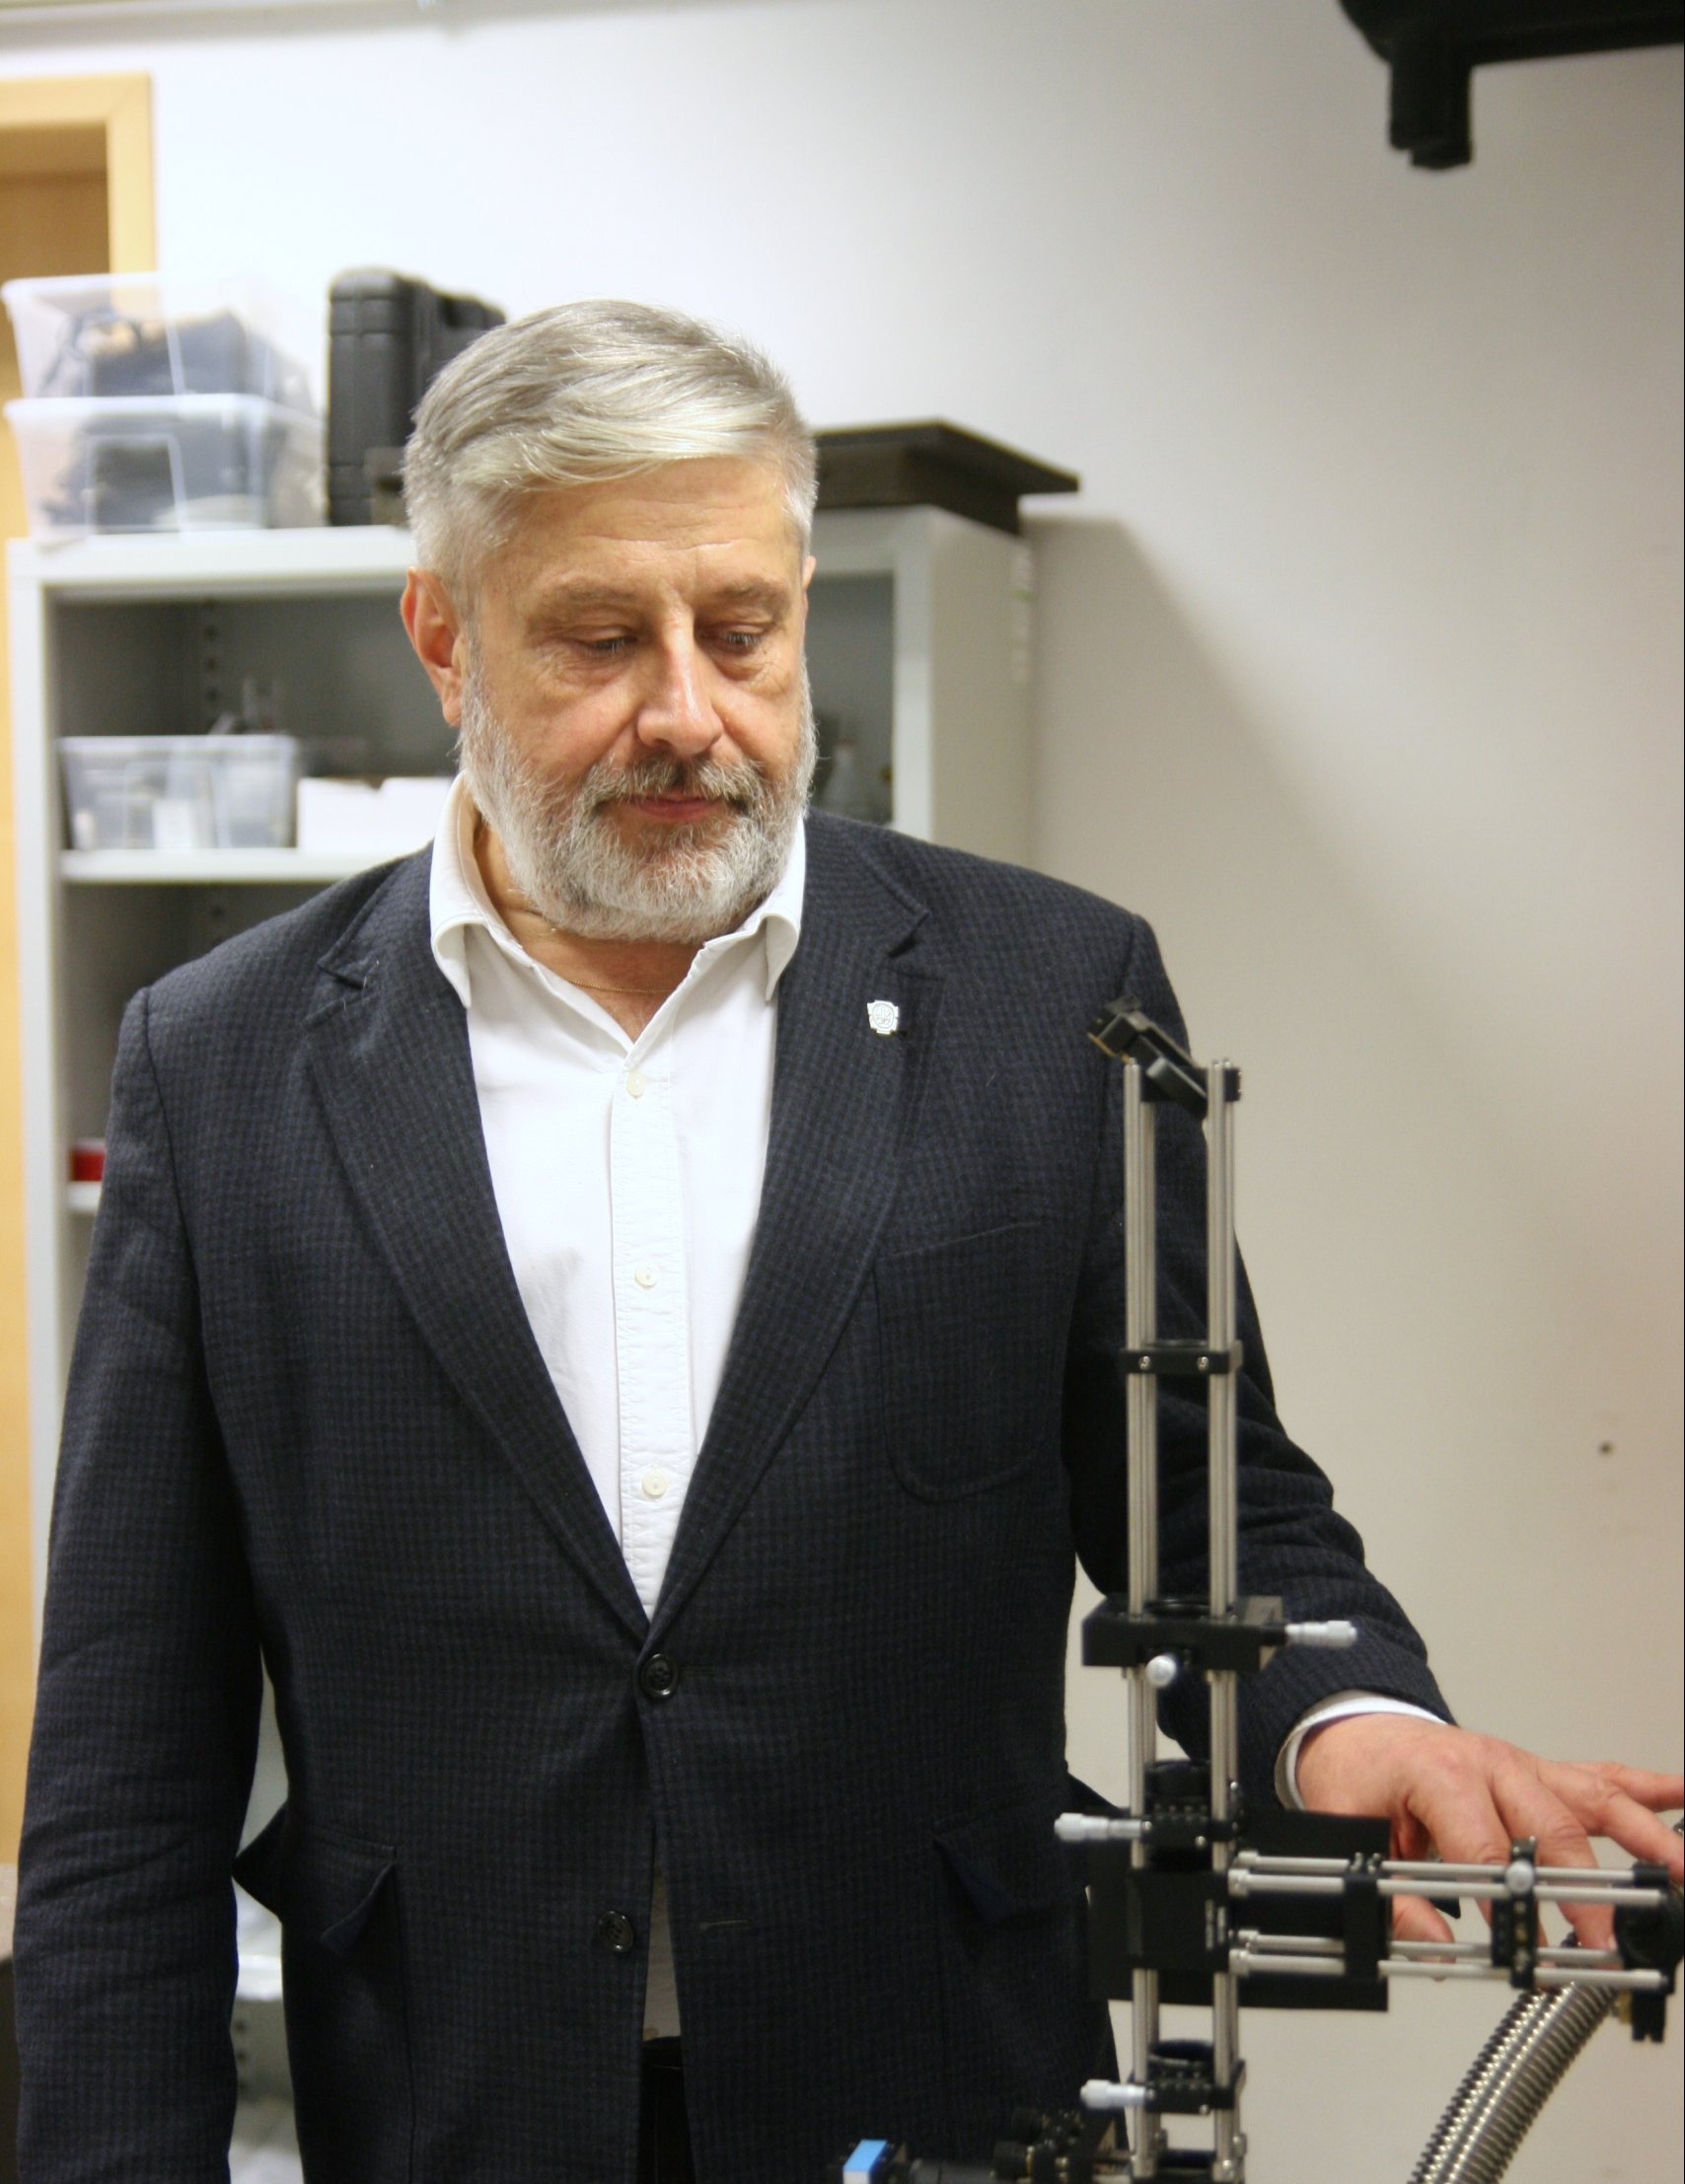 Professor Adam Babiński demonstrating the operation of the helium gas recovery infrastructure